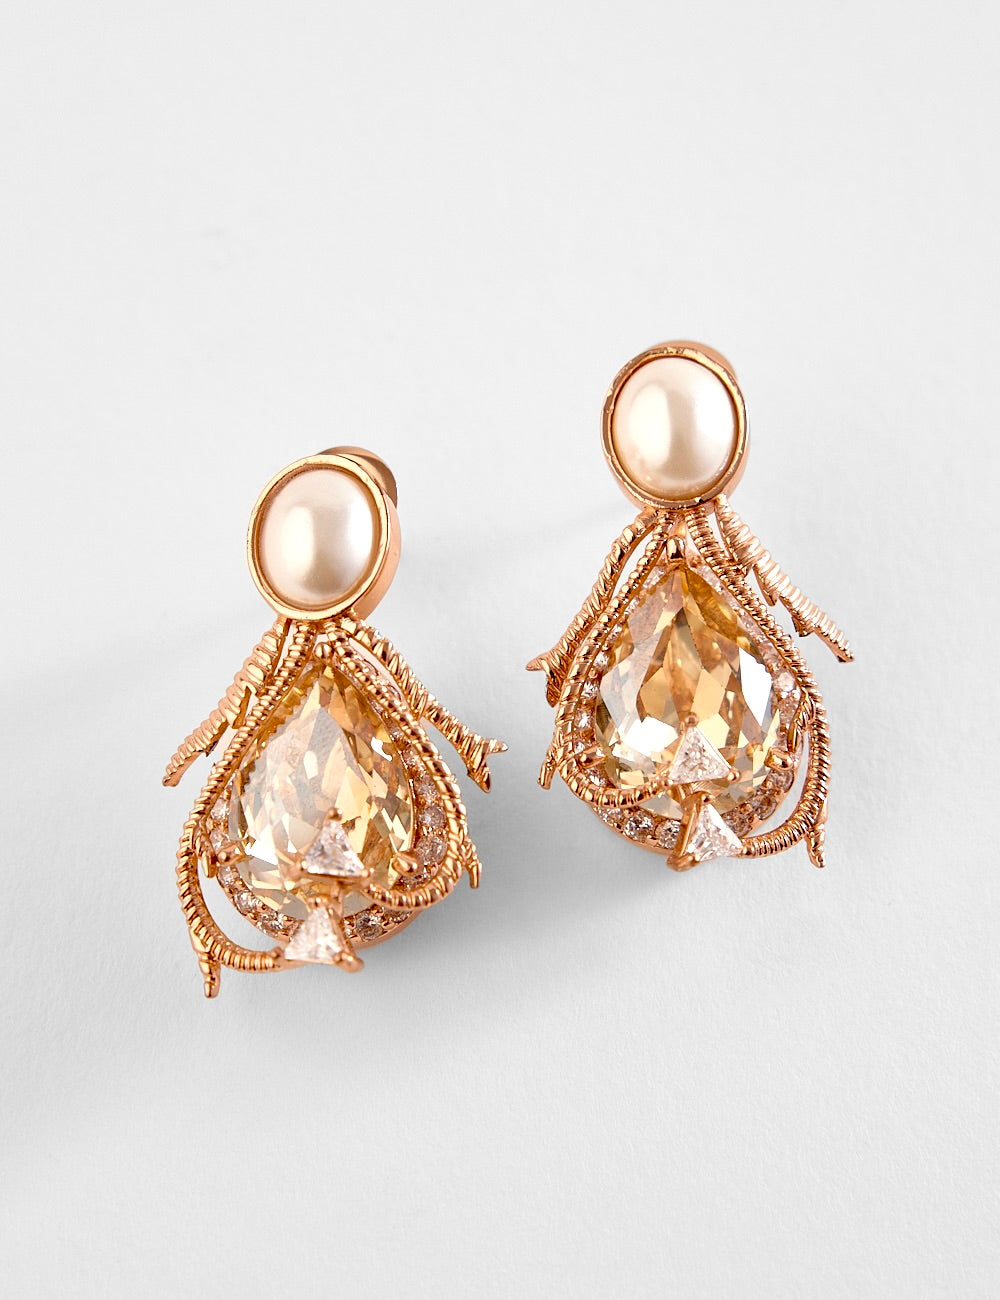 Buy Bridal Earrings Gold Online In India At Best Price Offers | Tata CLiQ